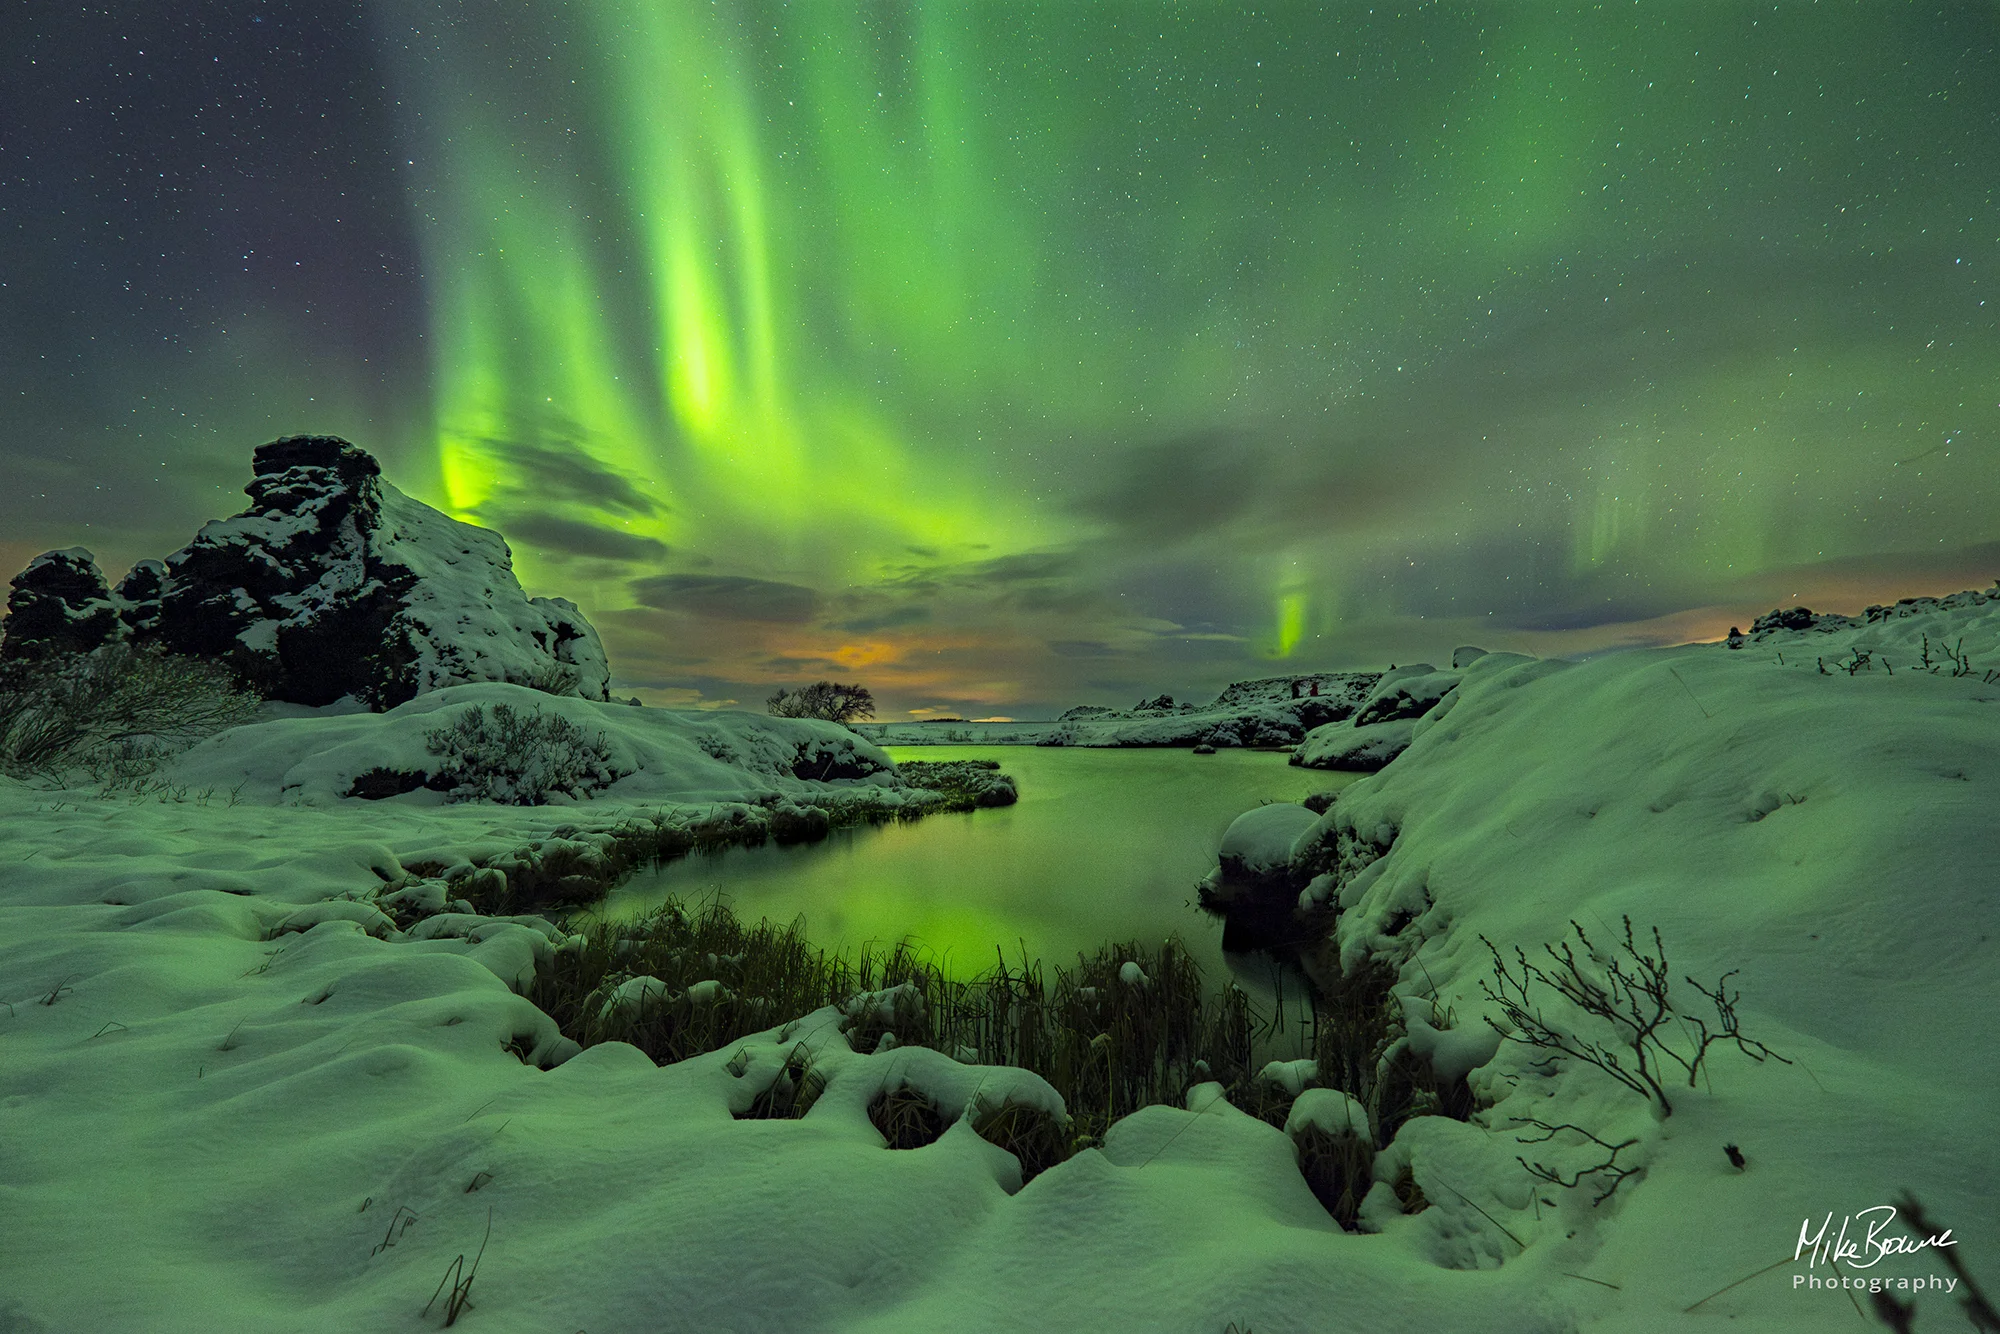 Northern Lights reflecting in a lake surrounded by snow